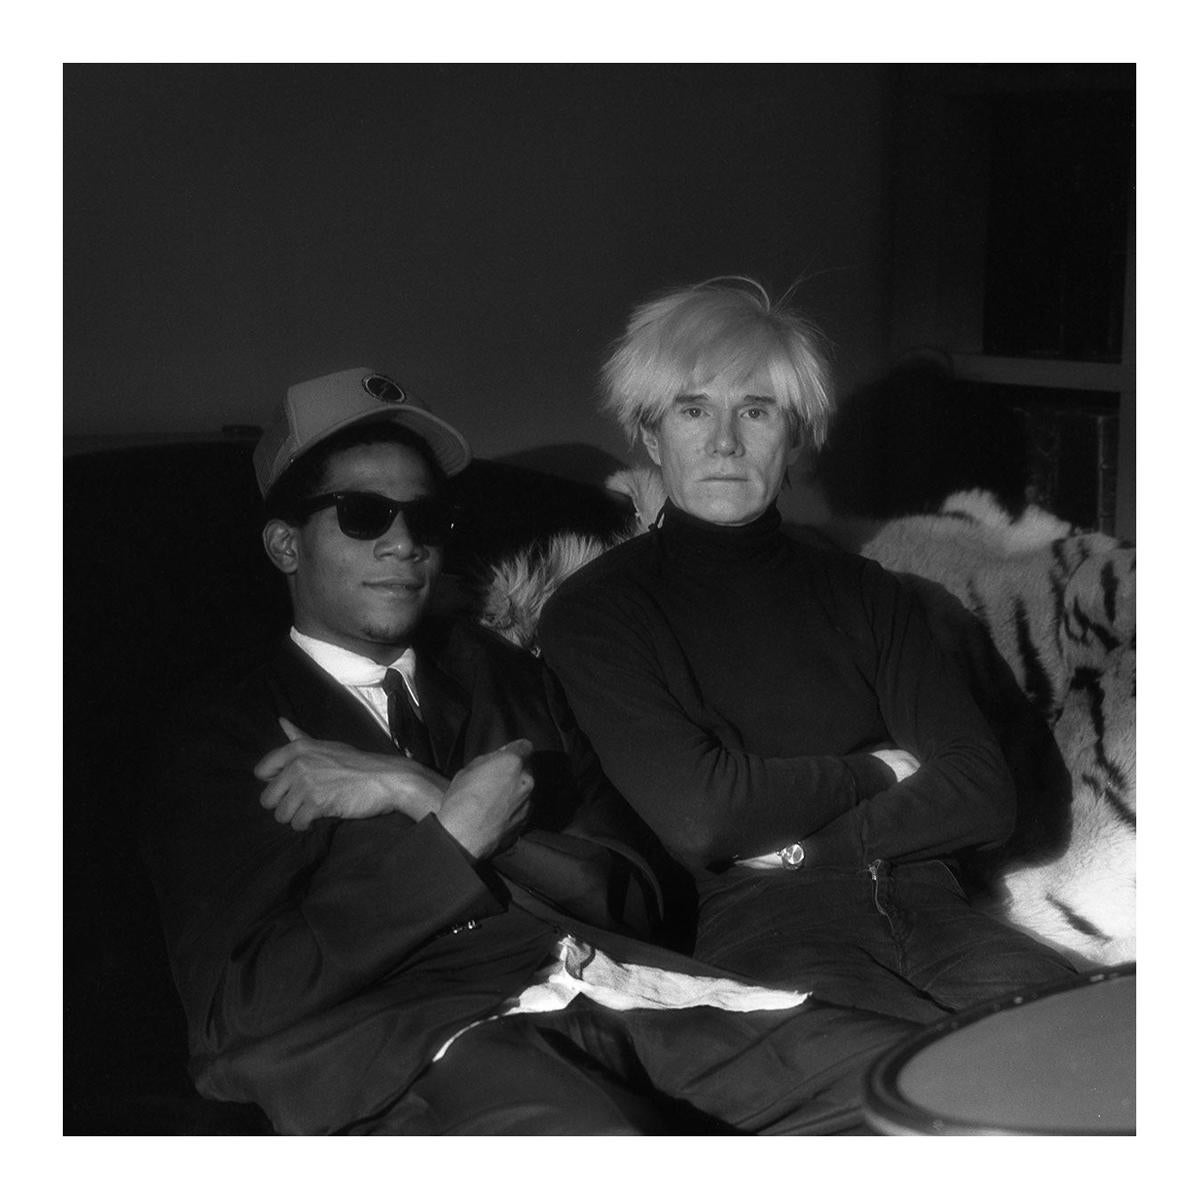 Vintage Photograph of "Jean-Michel Basquiat & Andy Warhol"